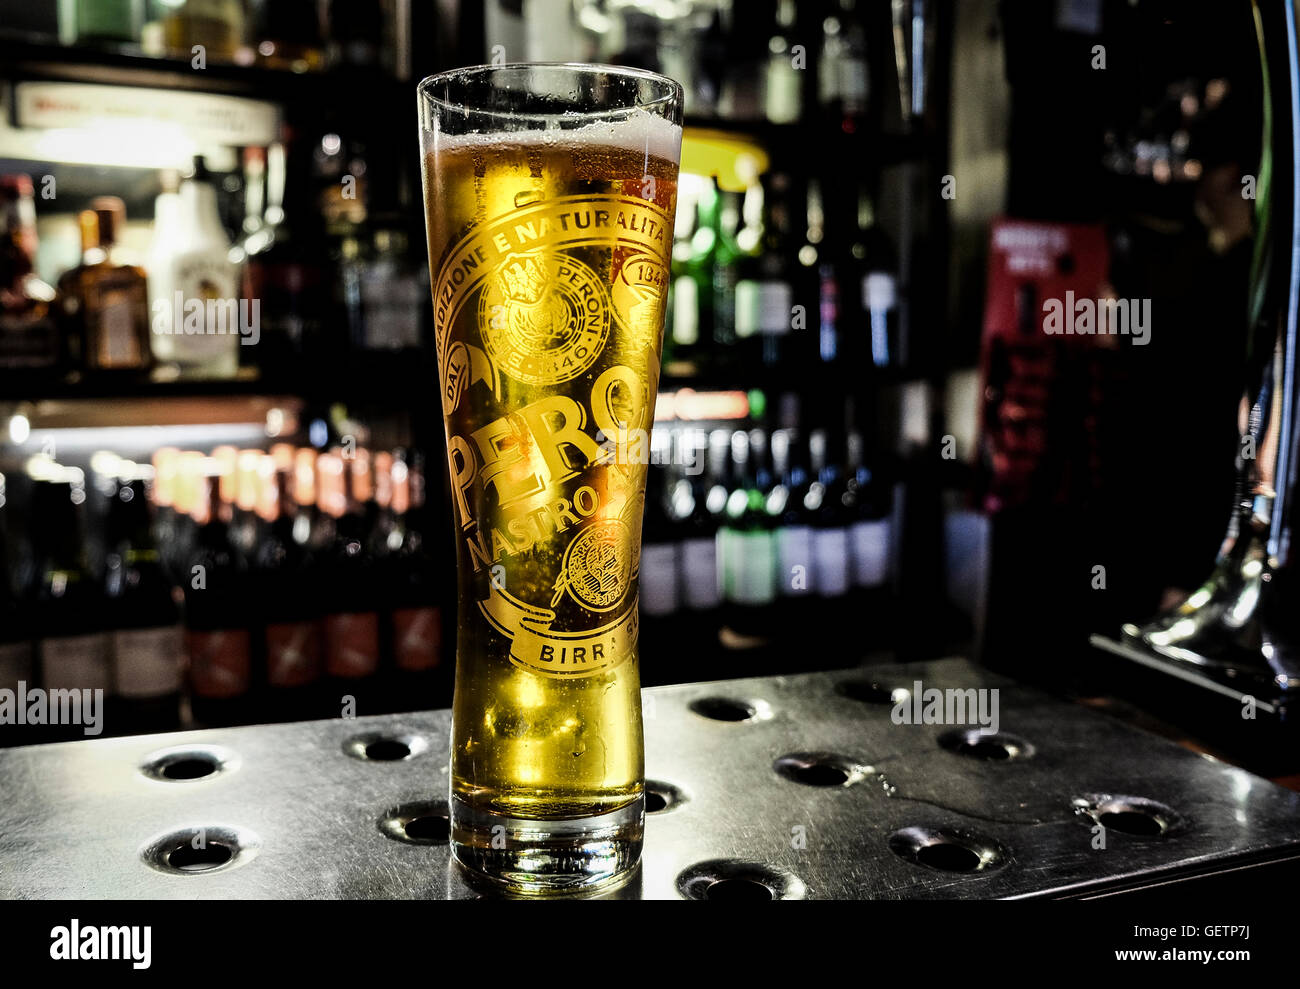 A pint glass of Peroni beer on a bar in a pub Stock Photo - Alamy